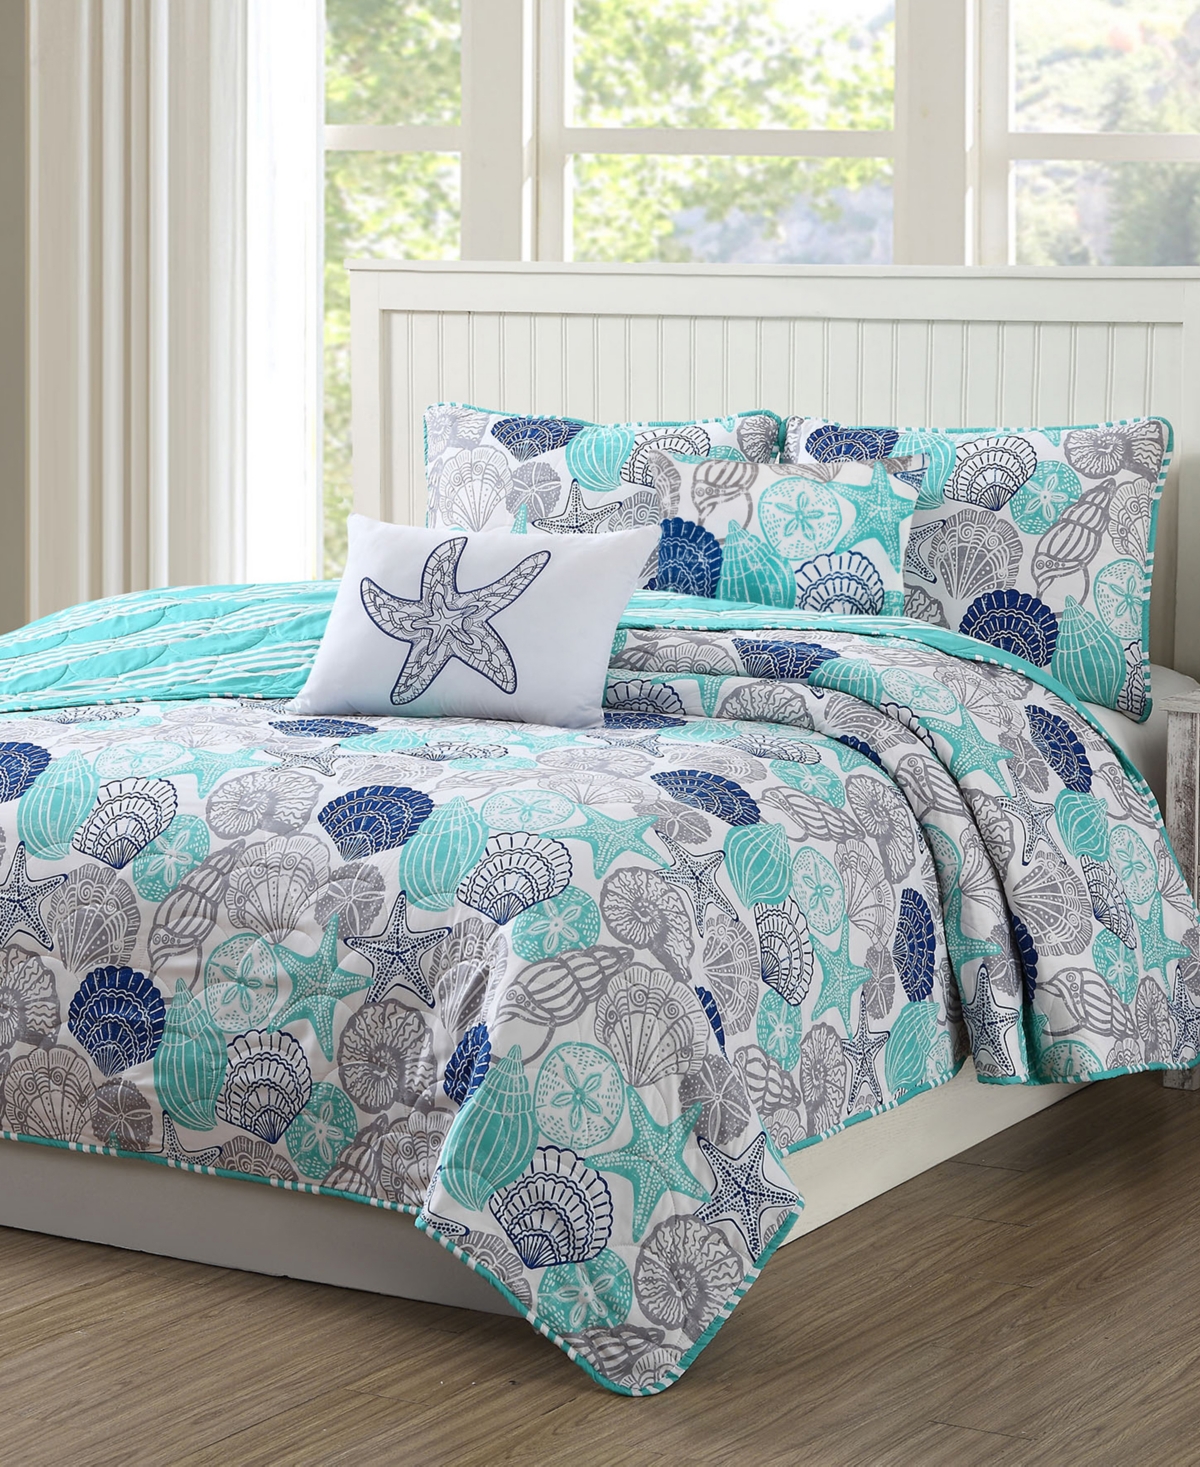 Seashell and Starfish Print Reversible 5 Piece Quilt Set, Full/Queen Bedding